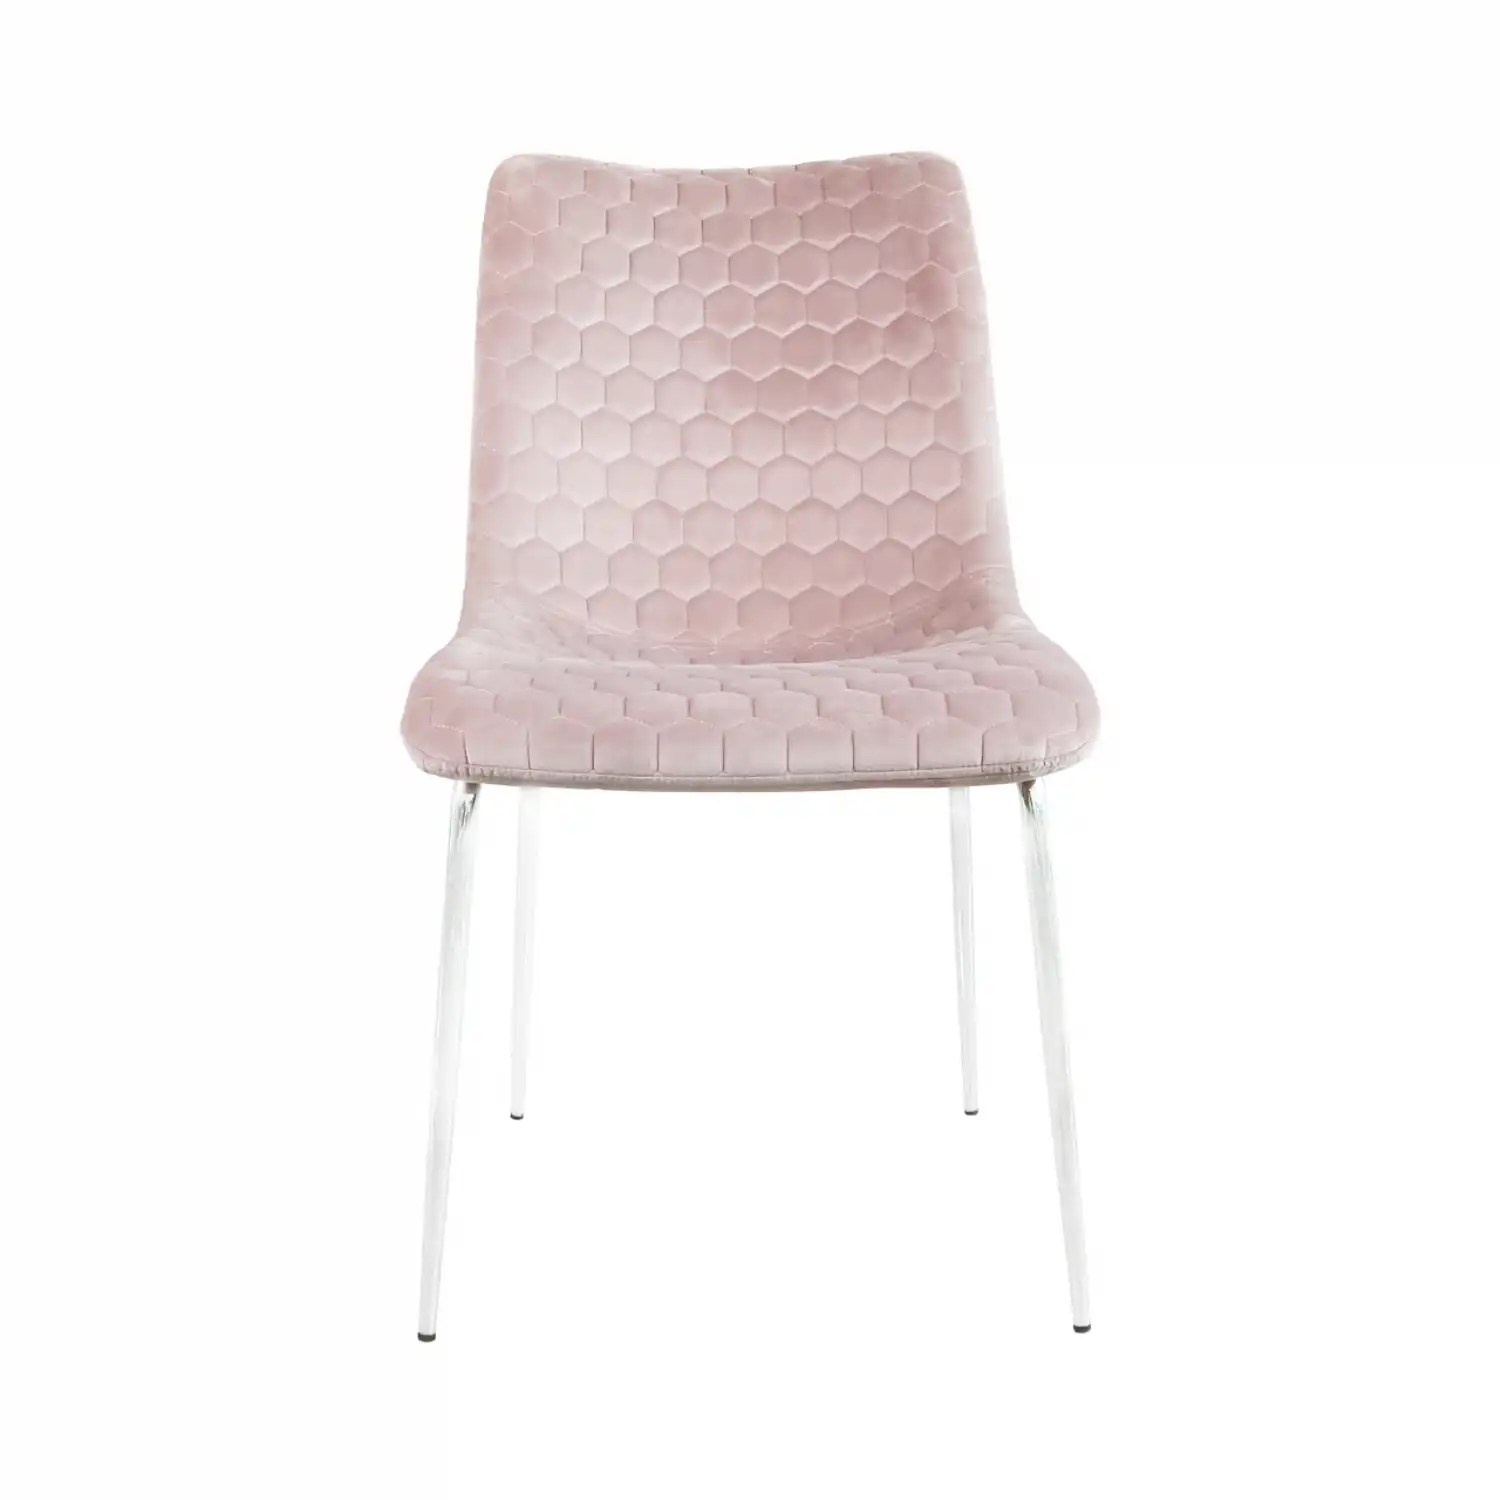 Pink Dining Chair Chrome Legs